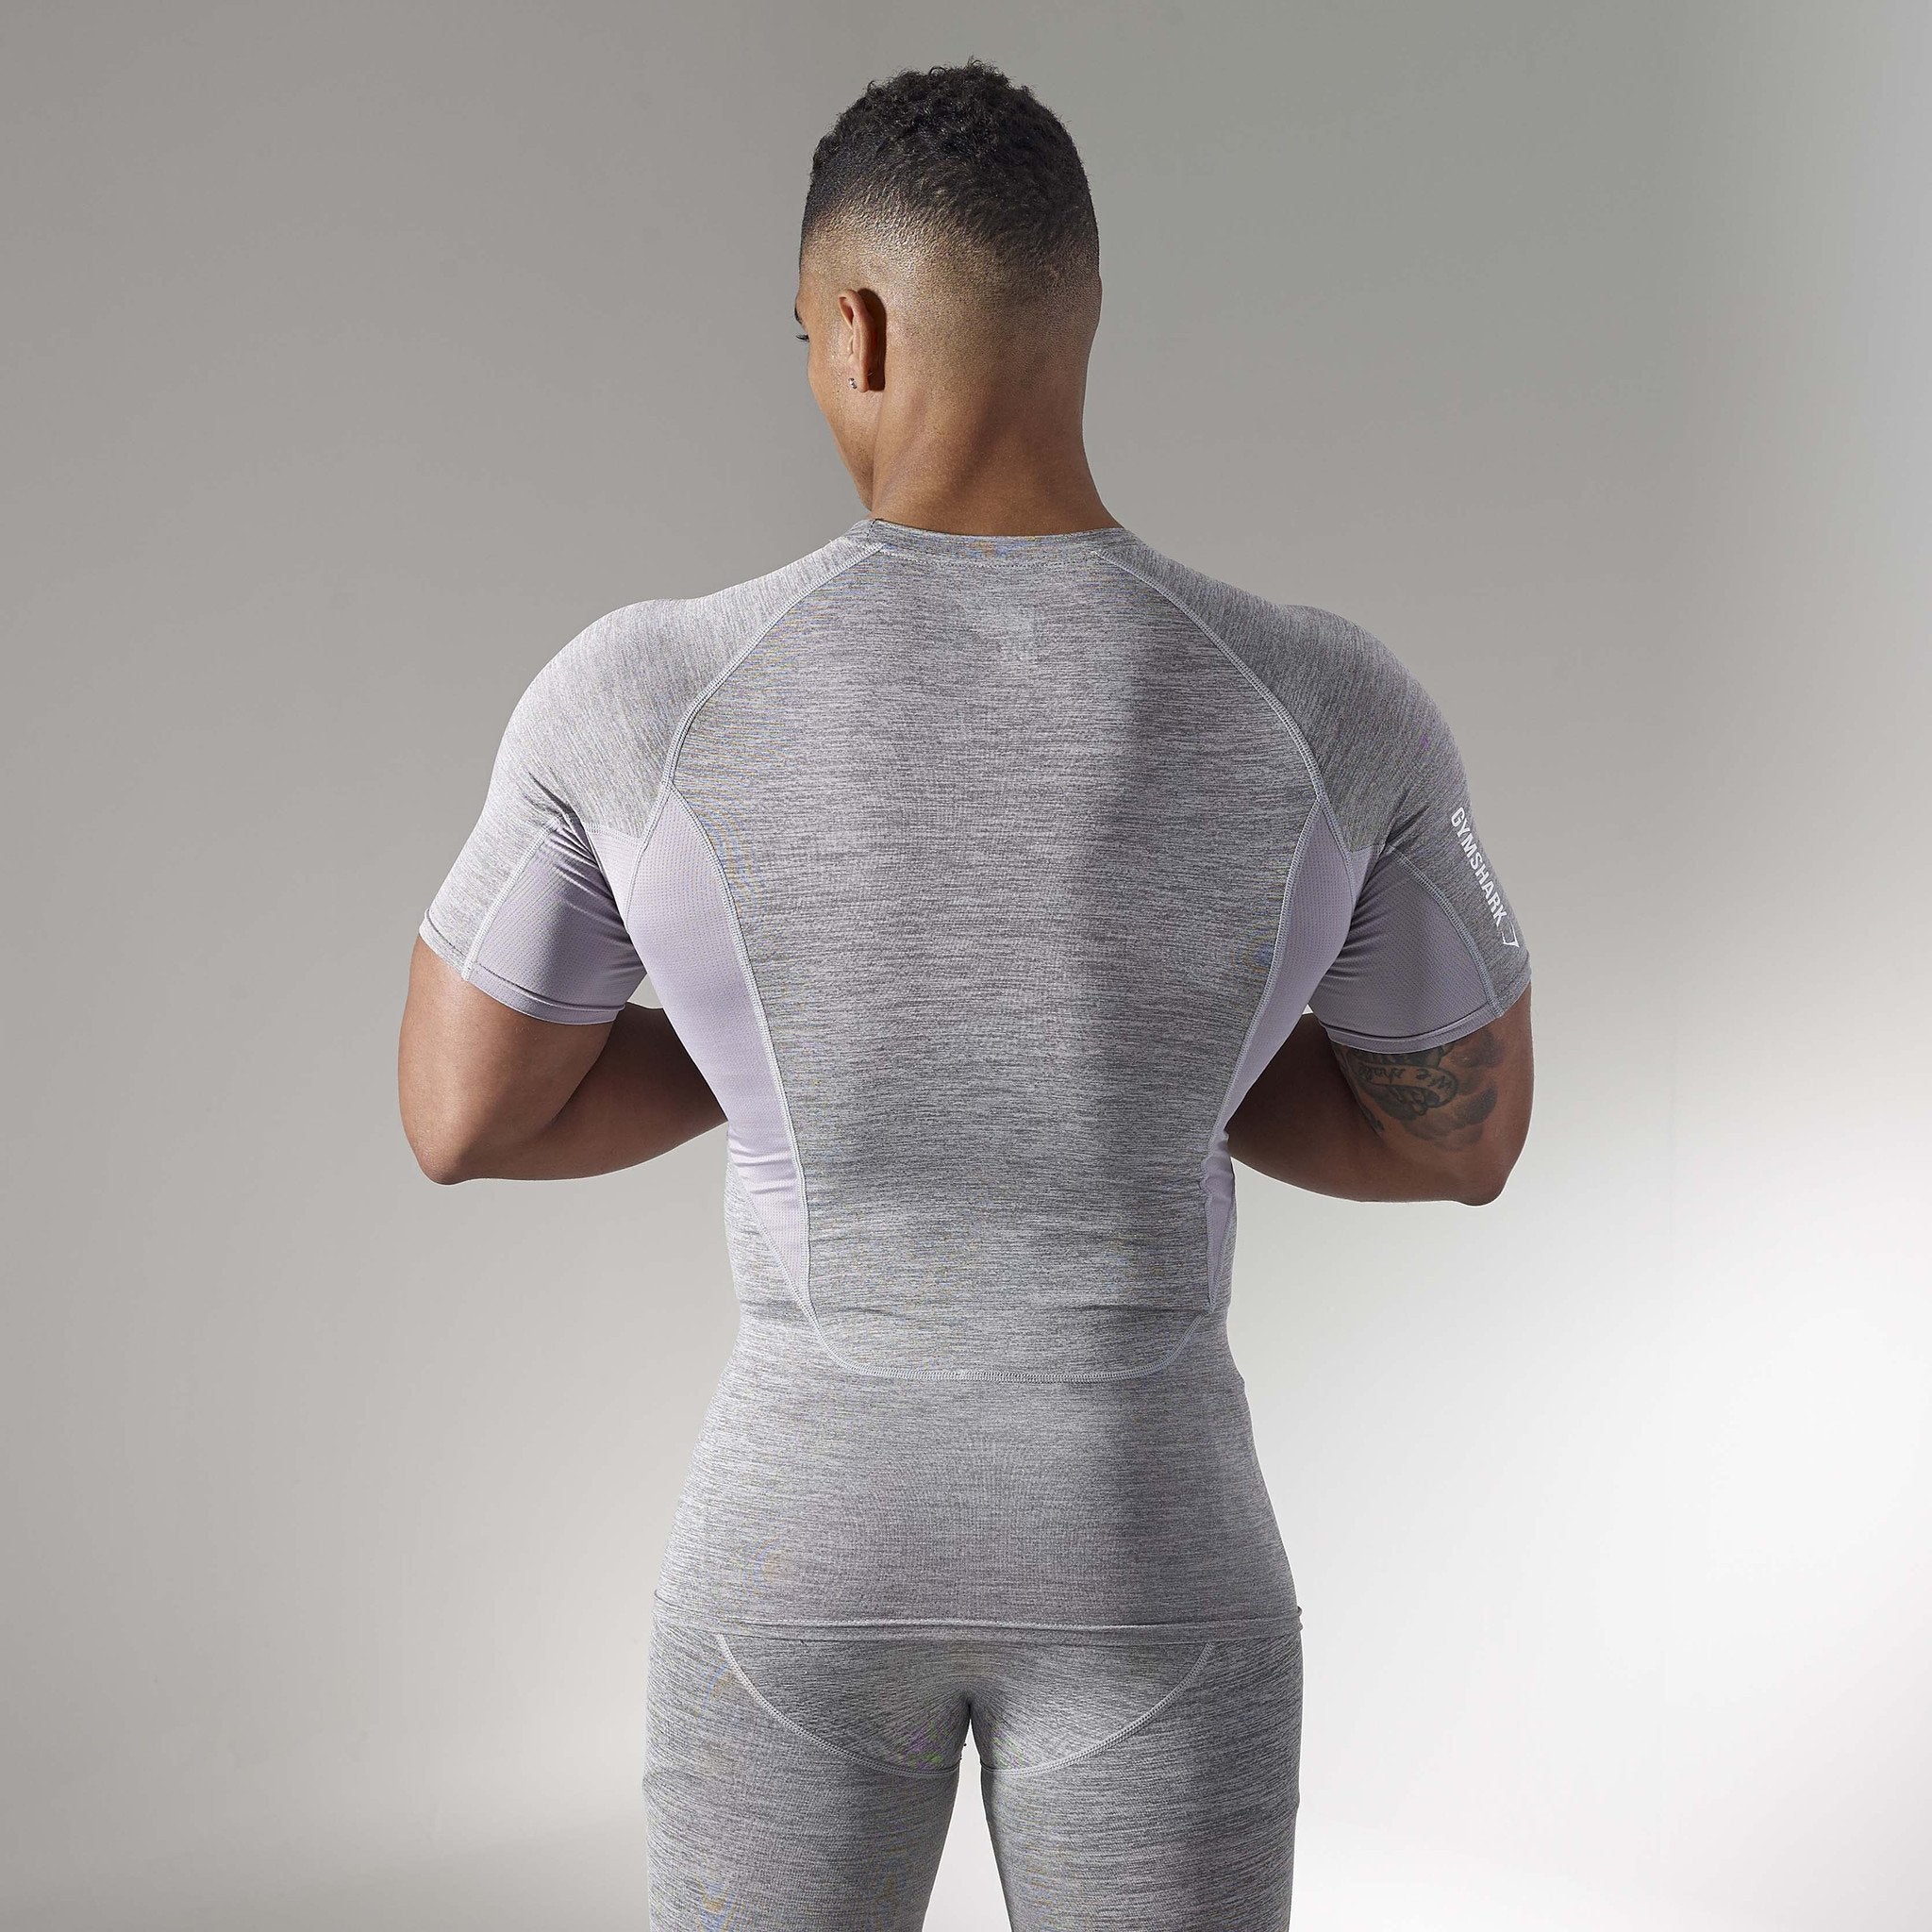 Element Baselayer Short Sleeve Top in Light Grey Marl - view 4